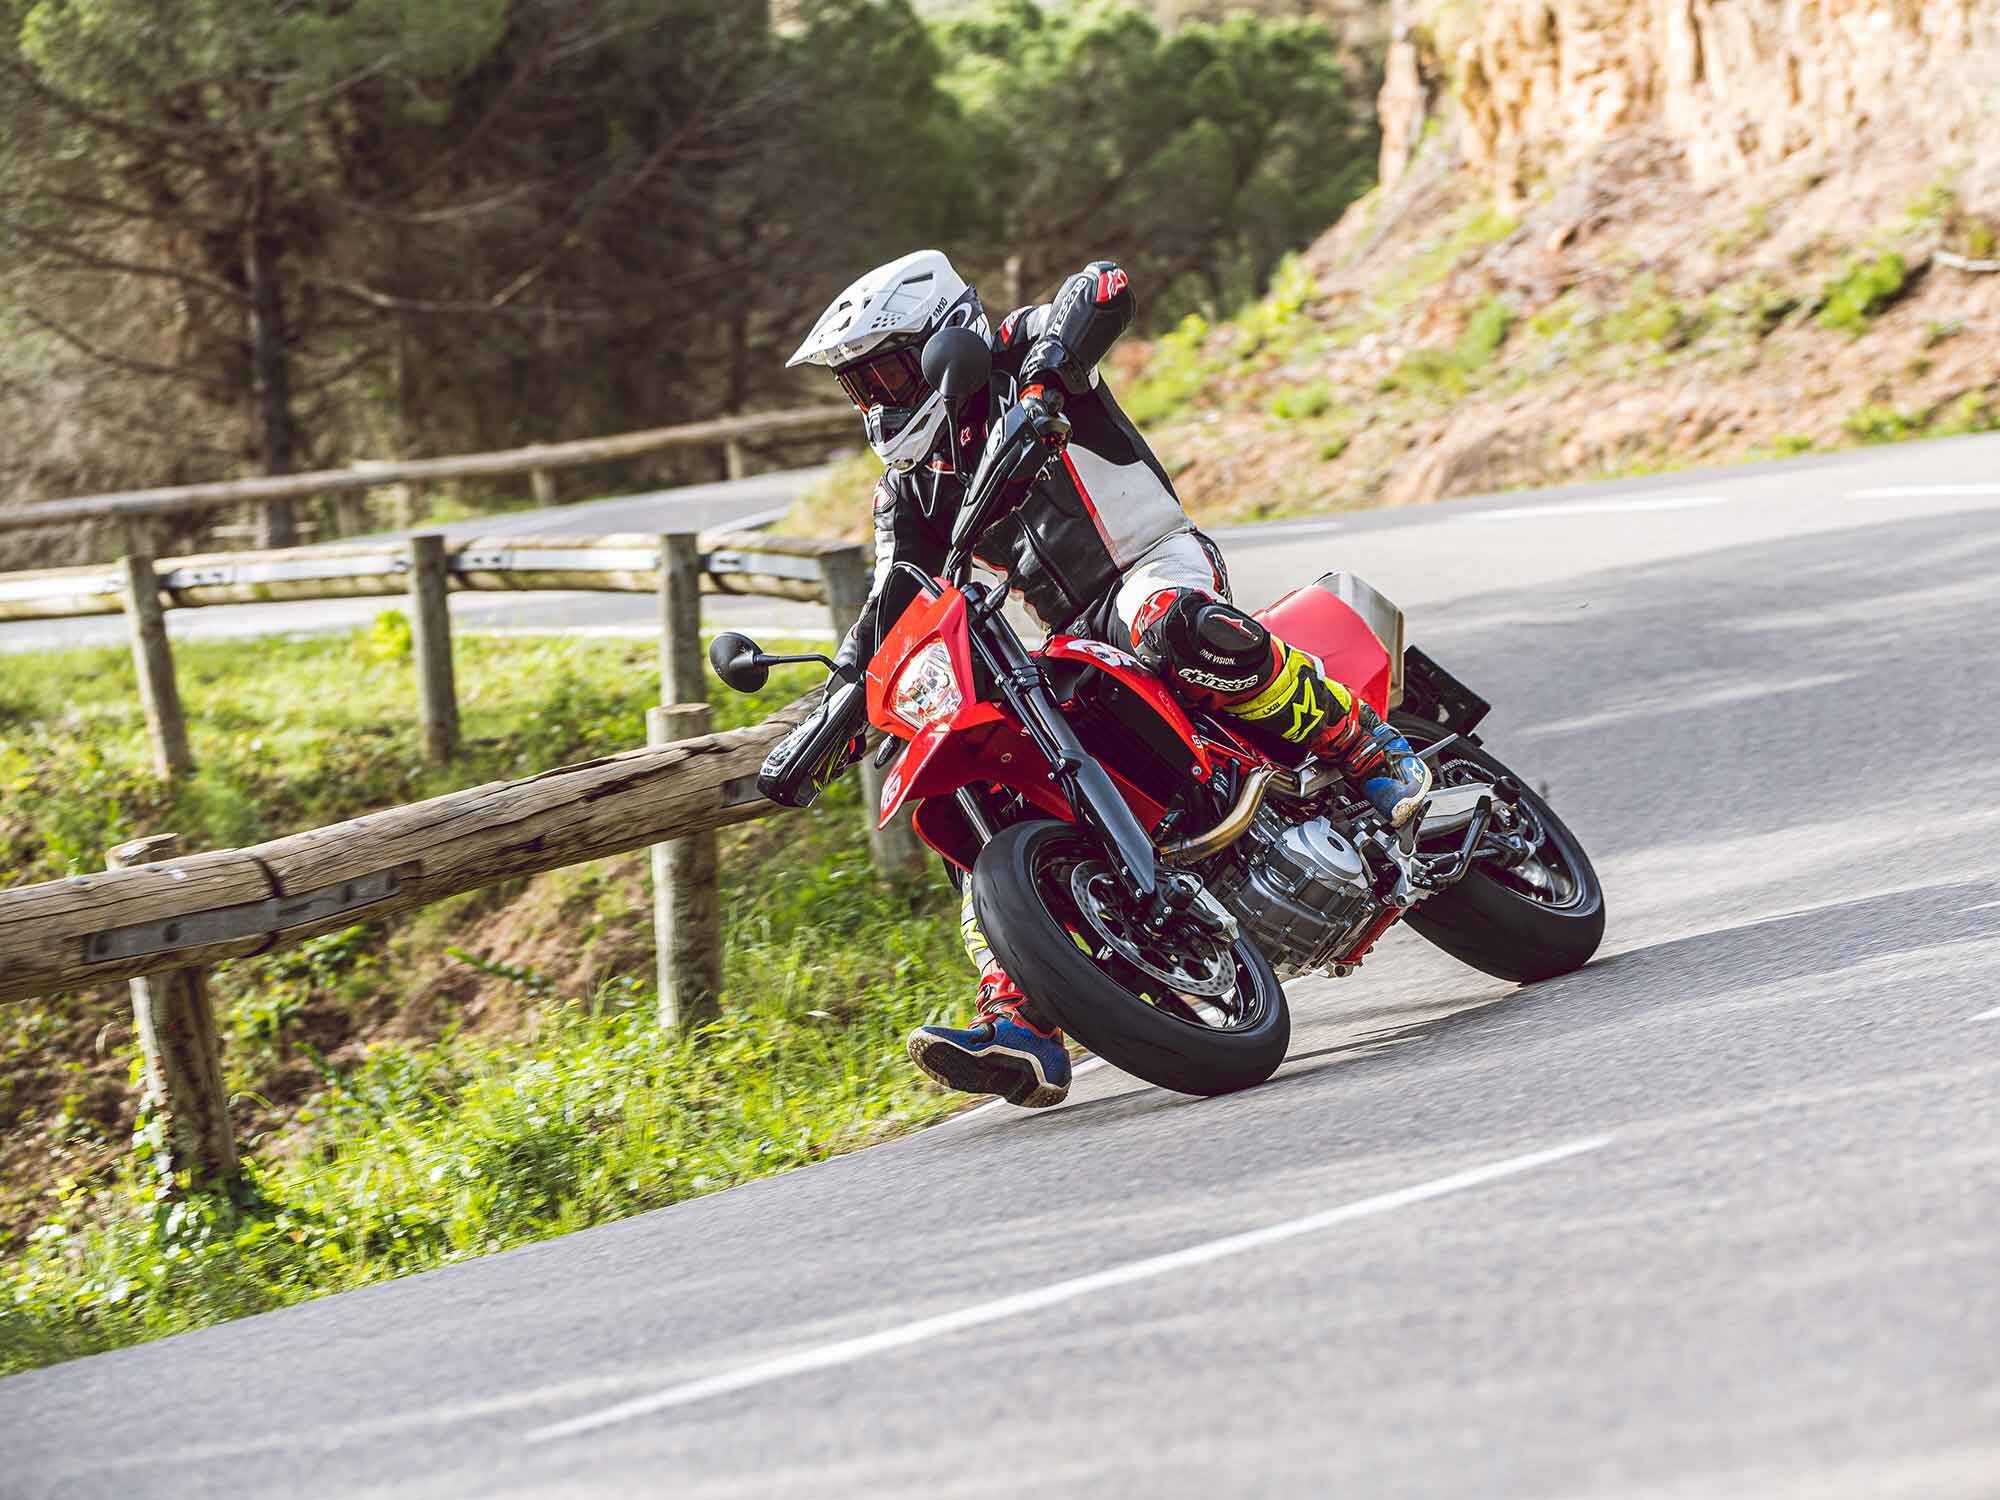 Should you wish, TC can be turned off, but it can’t be trimmed—it’s either Street or Supermoto or off. Cornering ABS can’t be switched off either, but the rear can be disengaged.